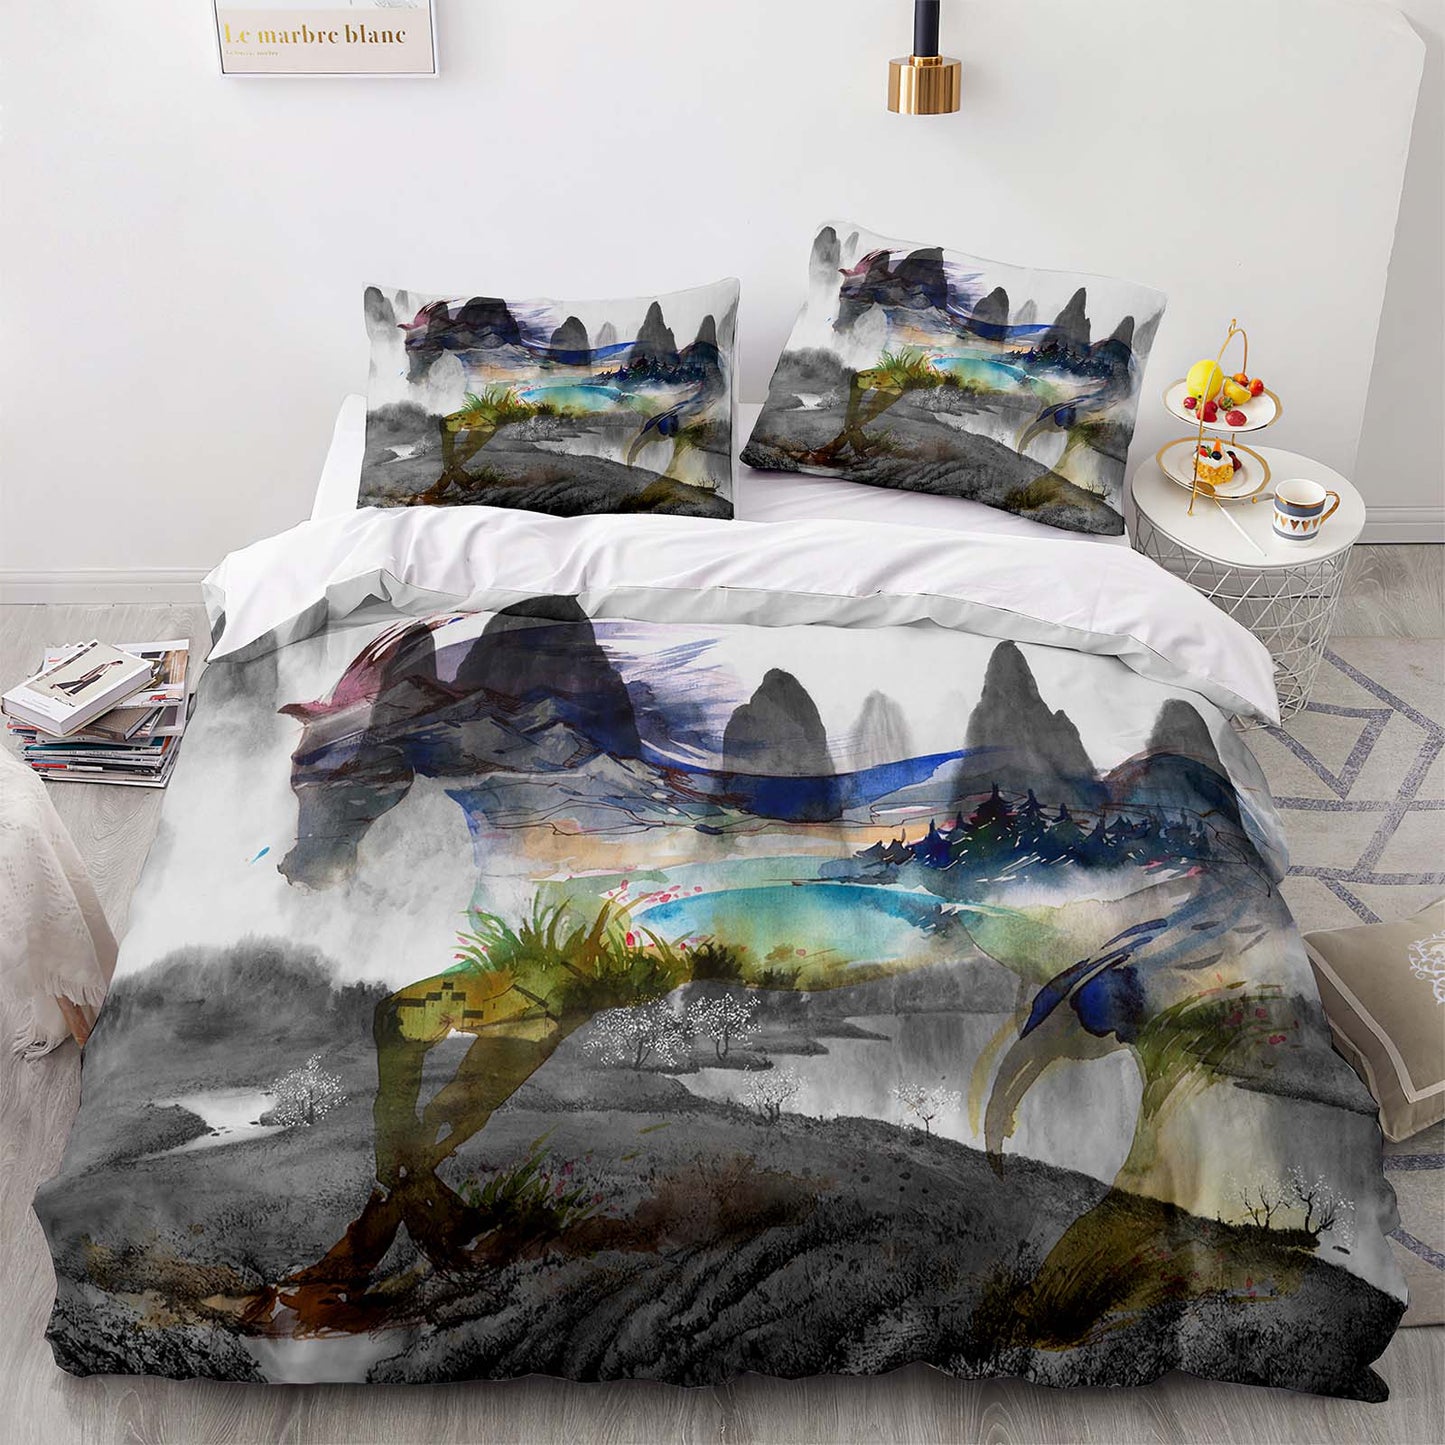 Cutom Duvet Cover Set Pattern Chic Comforter Cover King Size for Teens Adults Bedding Set with Pillowcases  M3004